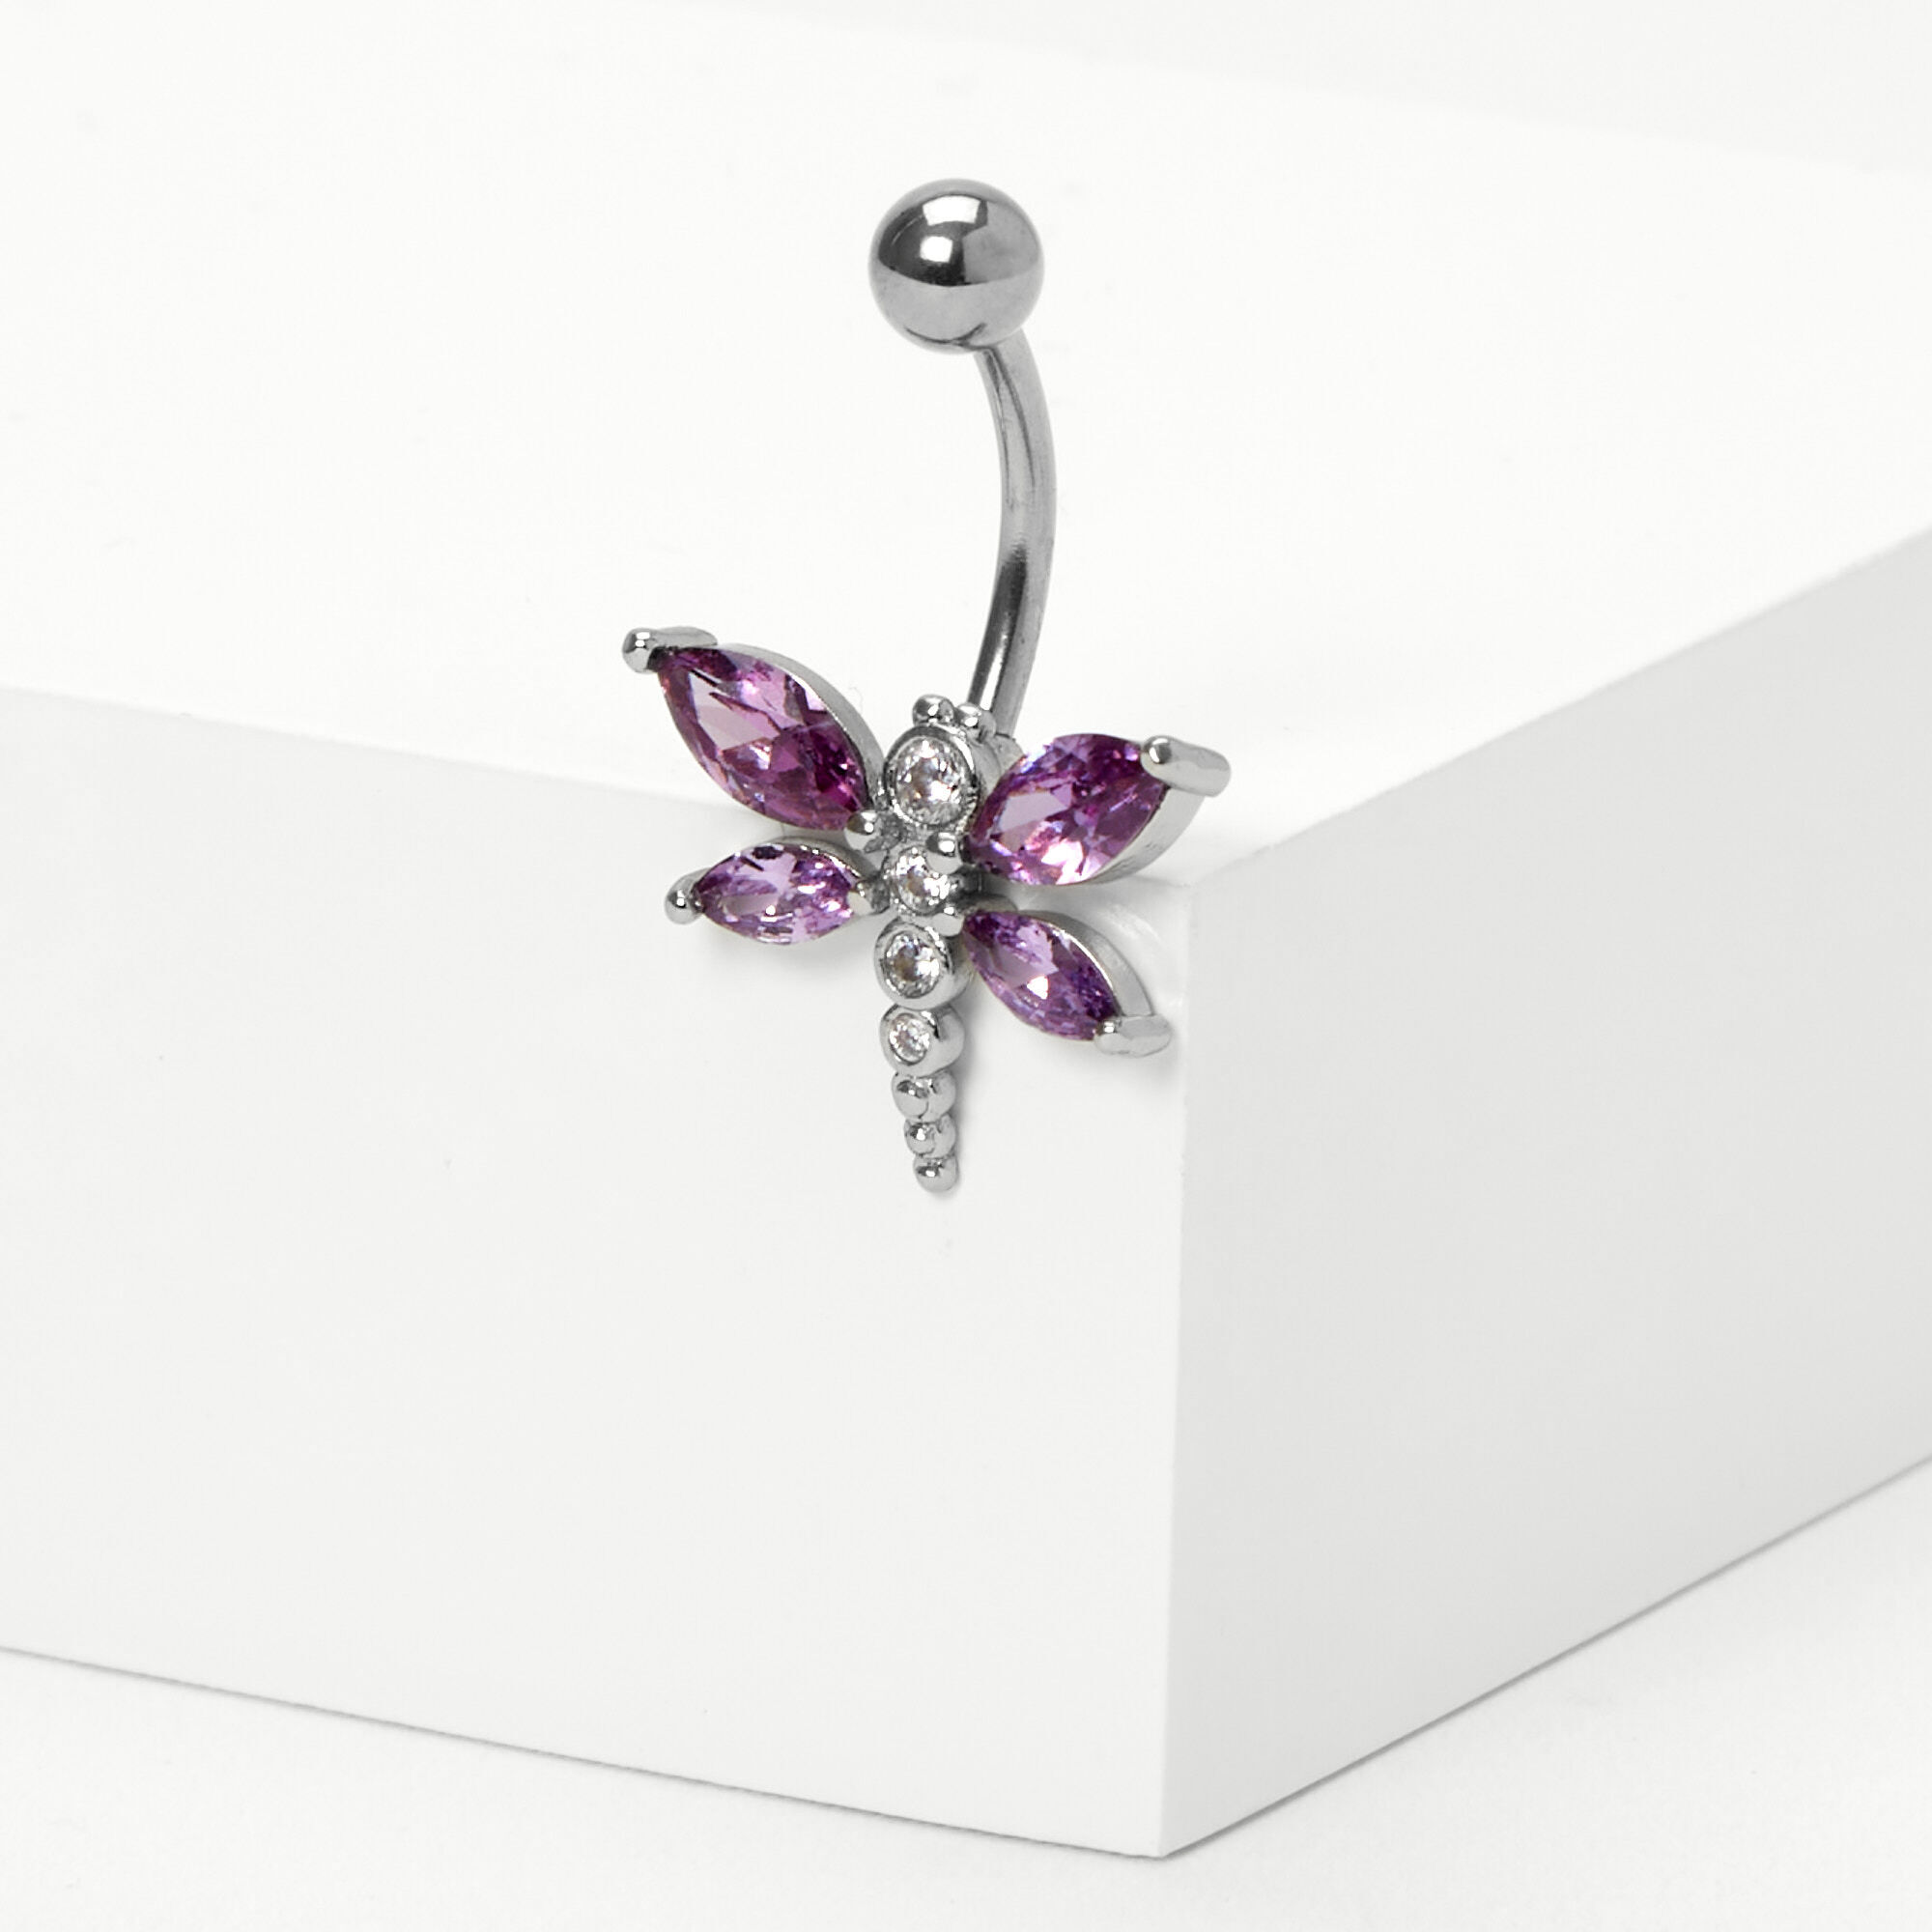 View Claires Tone 14G Crystal Dragonfly Belly Ring Silver information